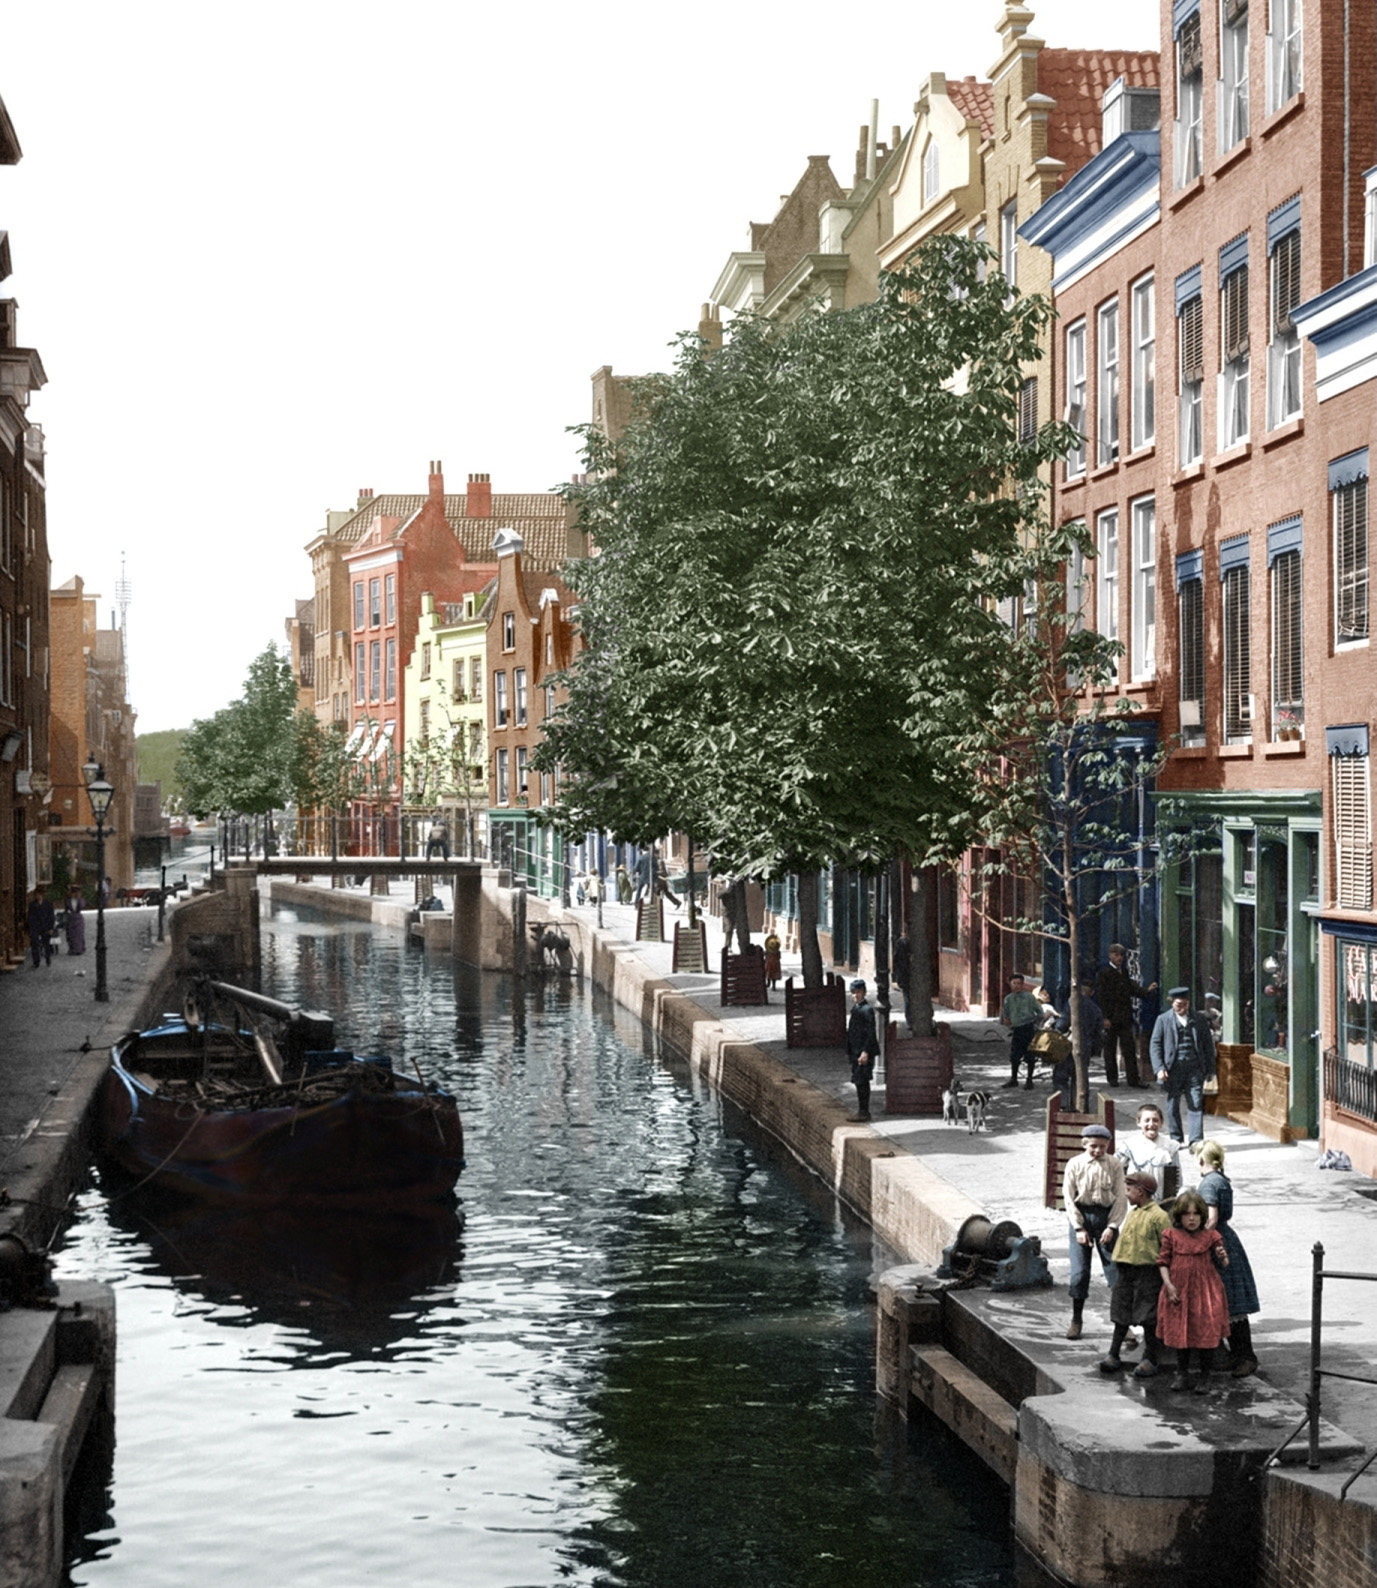 Colorized version of Spuiwaterboot Canal in Rotterdam as seen from a bridge. One of a series of images taken in Europe in 1904 by an unknown photographer. (There is some disagreement regarding the location of this canal but a great photo never the less). View full size.